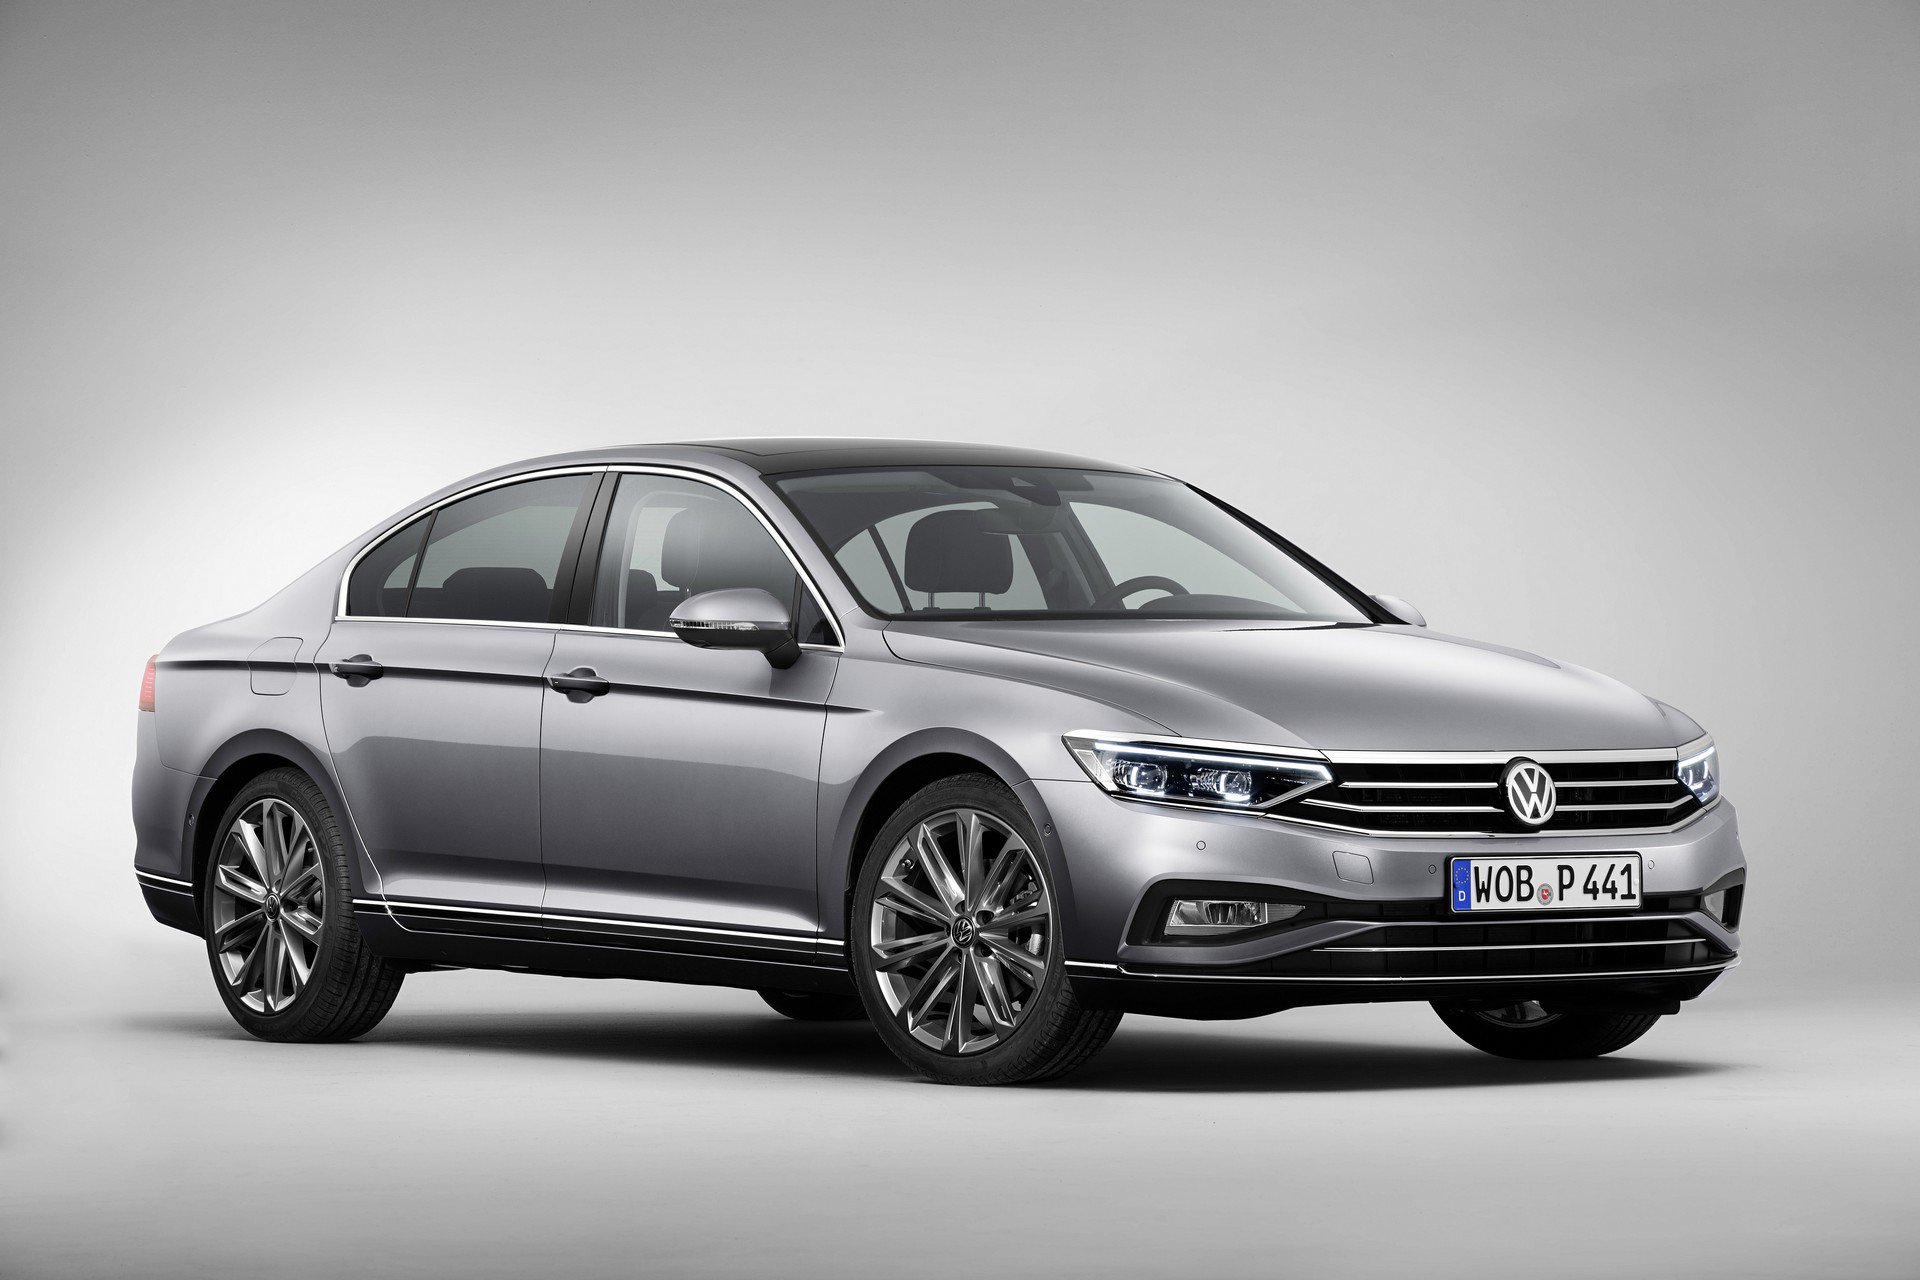 european-vw-passat-sedan-reportedly-axed-sources-say-only-wagon-will-survive-152240_1.jpg